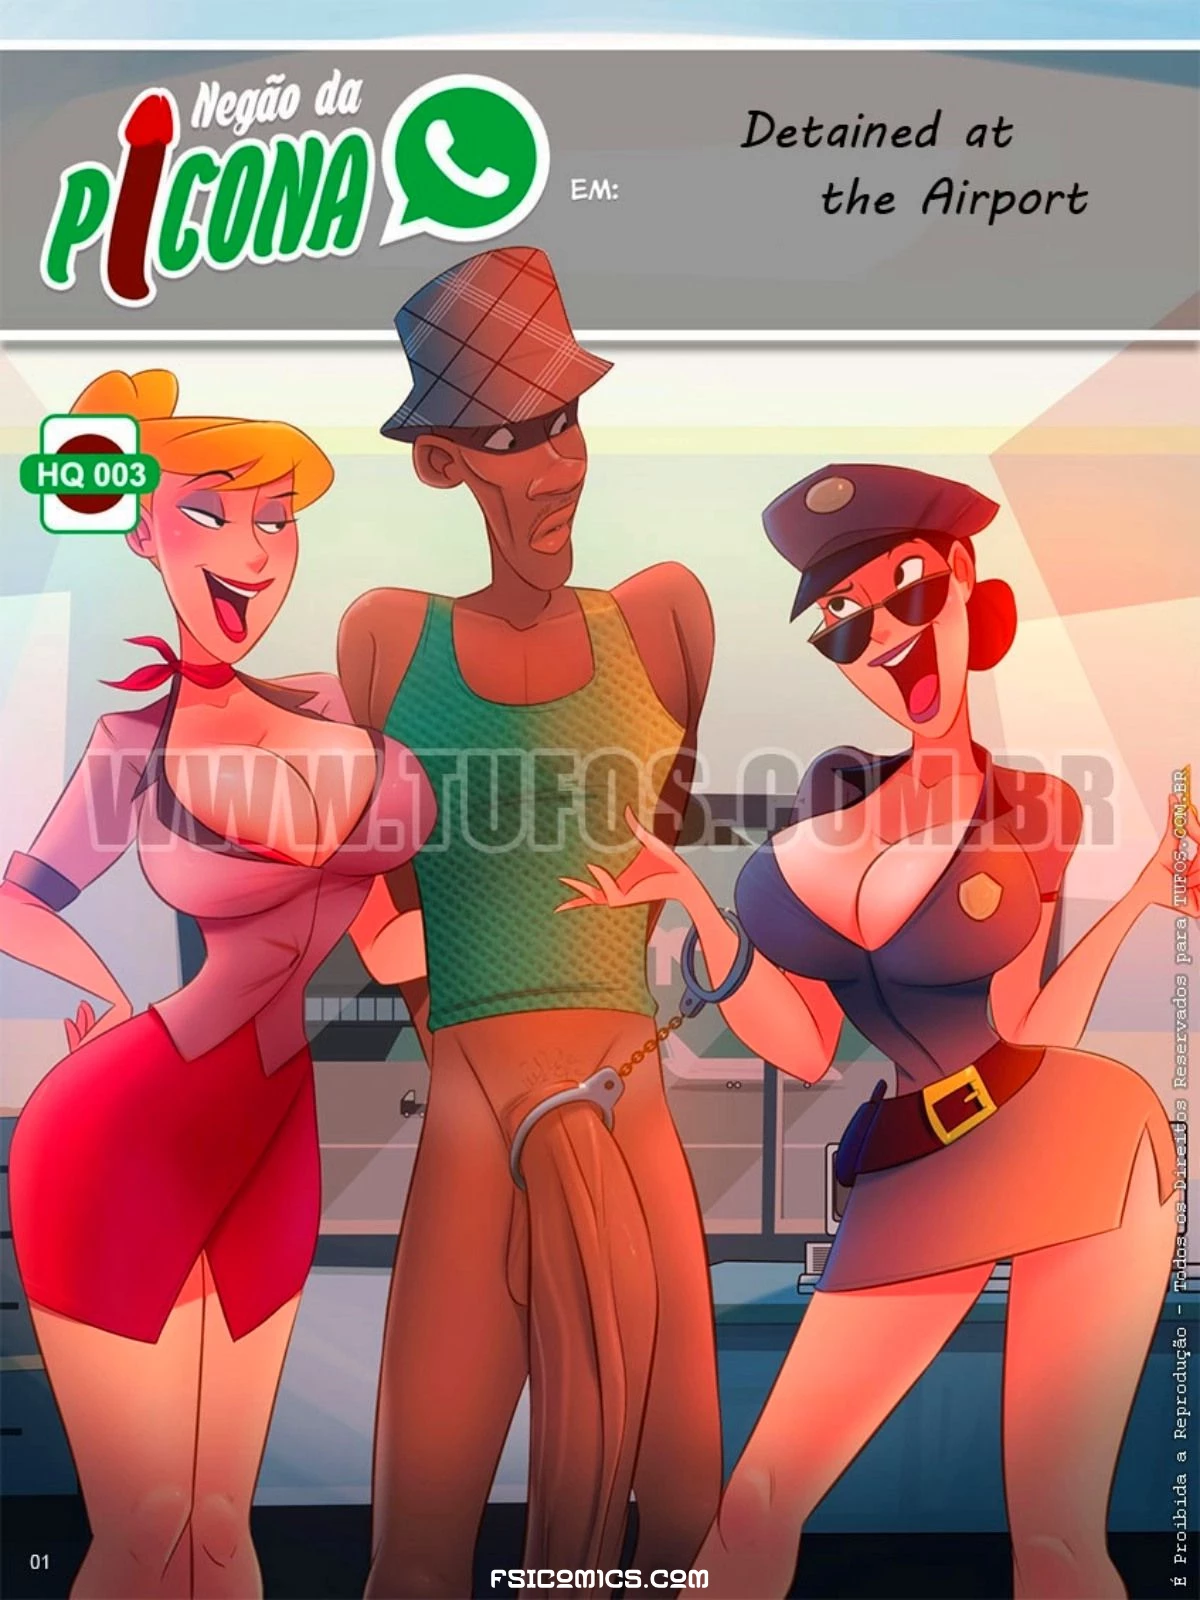 Negao Da Picona Chapter 3 - Detained at the Airport – WC | TF - 7 - FSIComics